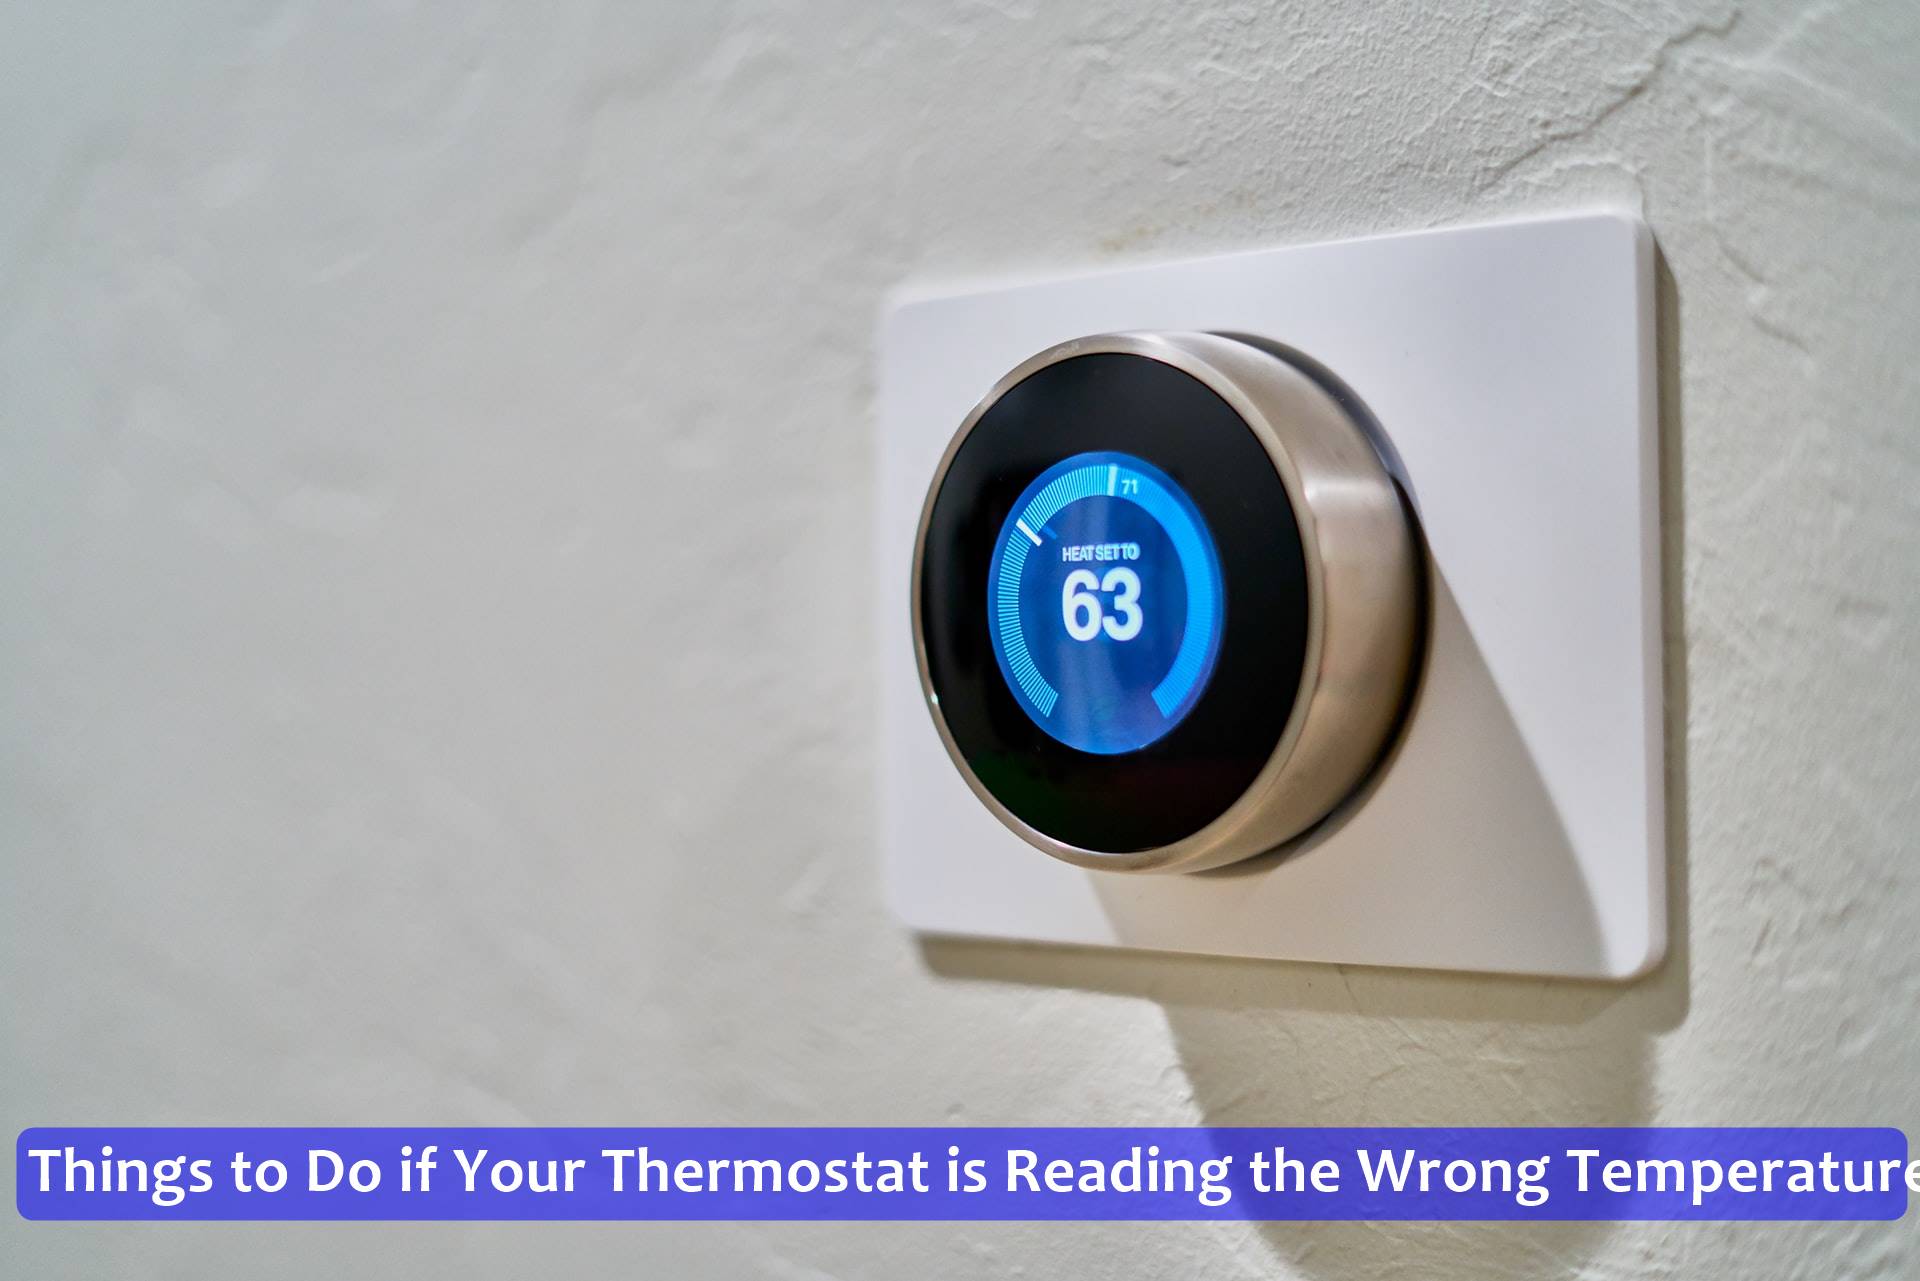 Things to Do if Your Thermostat is Reading the Wrong Temperature